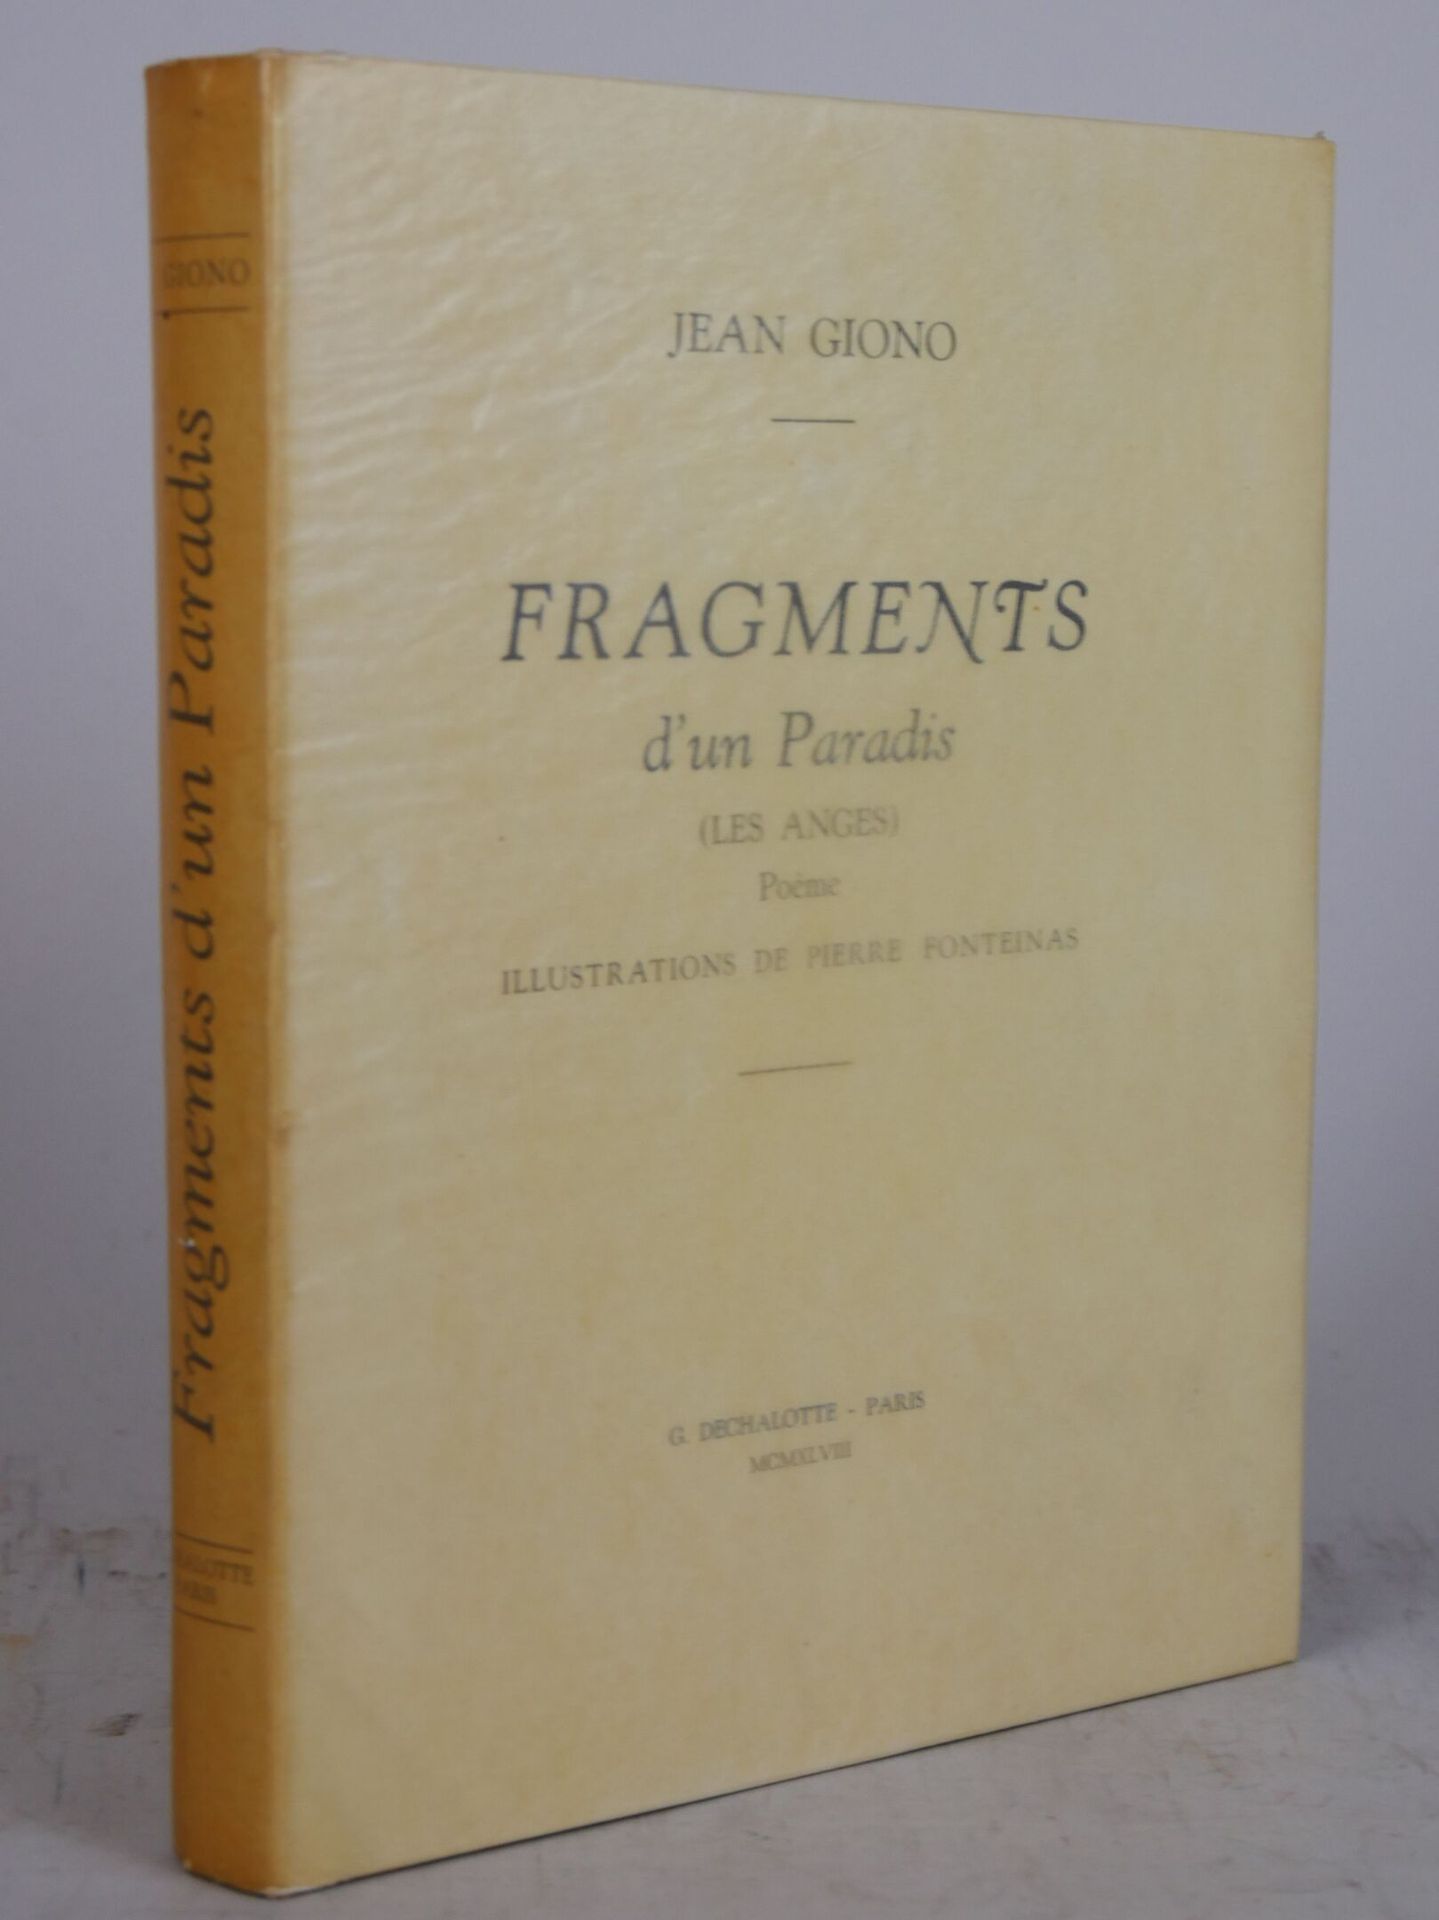 Null GIONO (Jean) & FONTEINAS (Pierre).
Fragments d'un Paradis (les anges) - Ged&hellip;